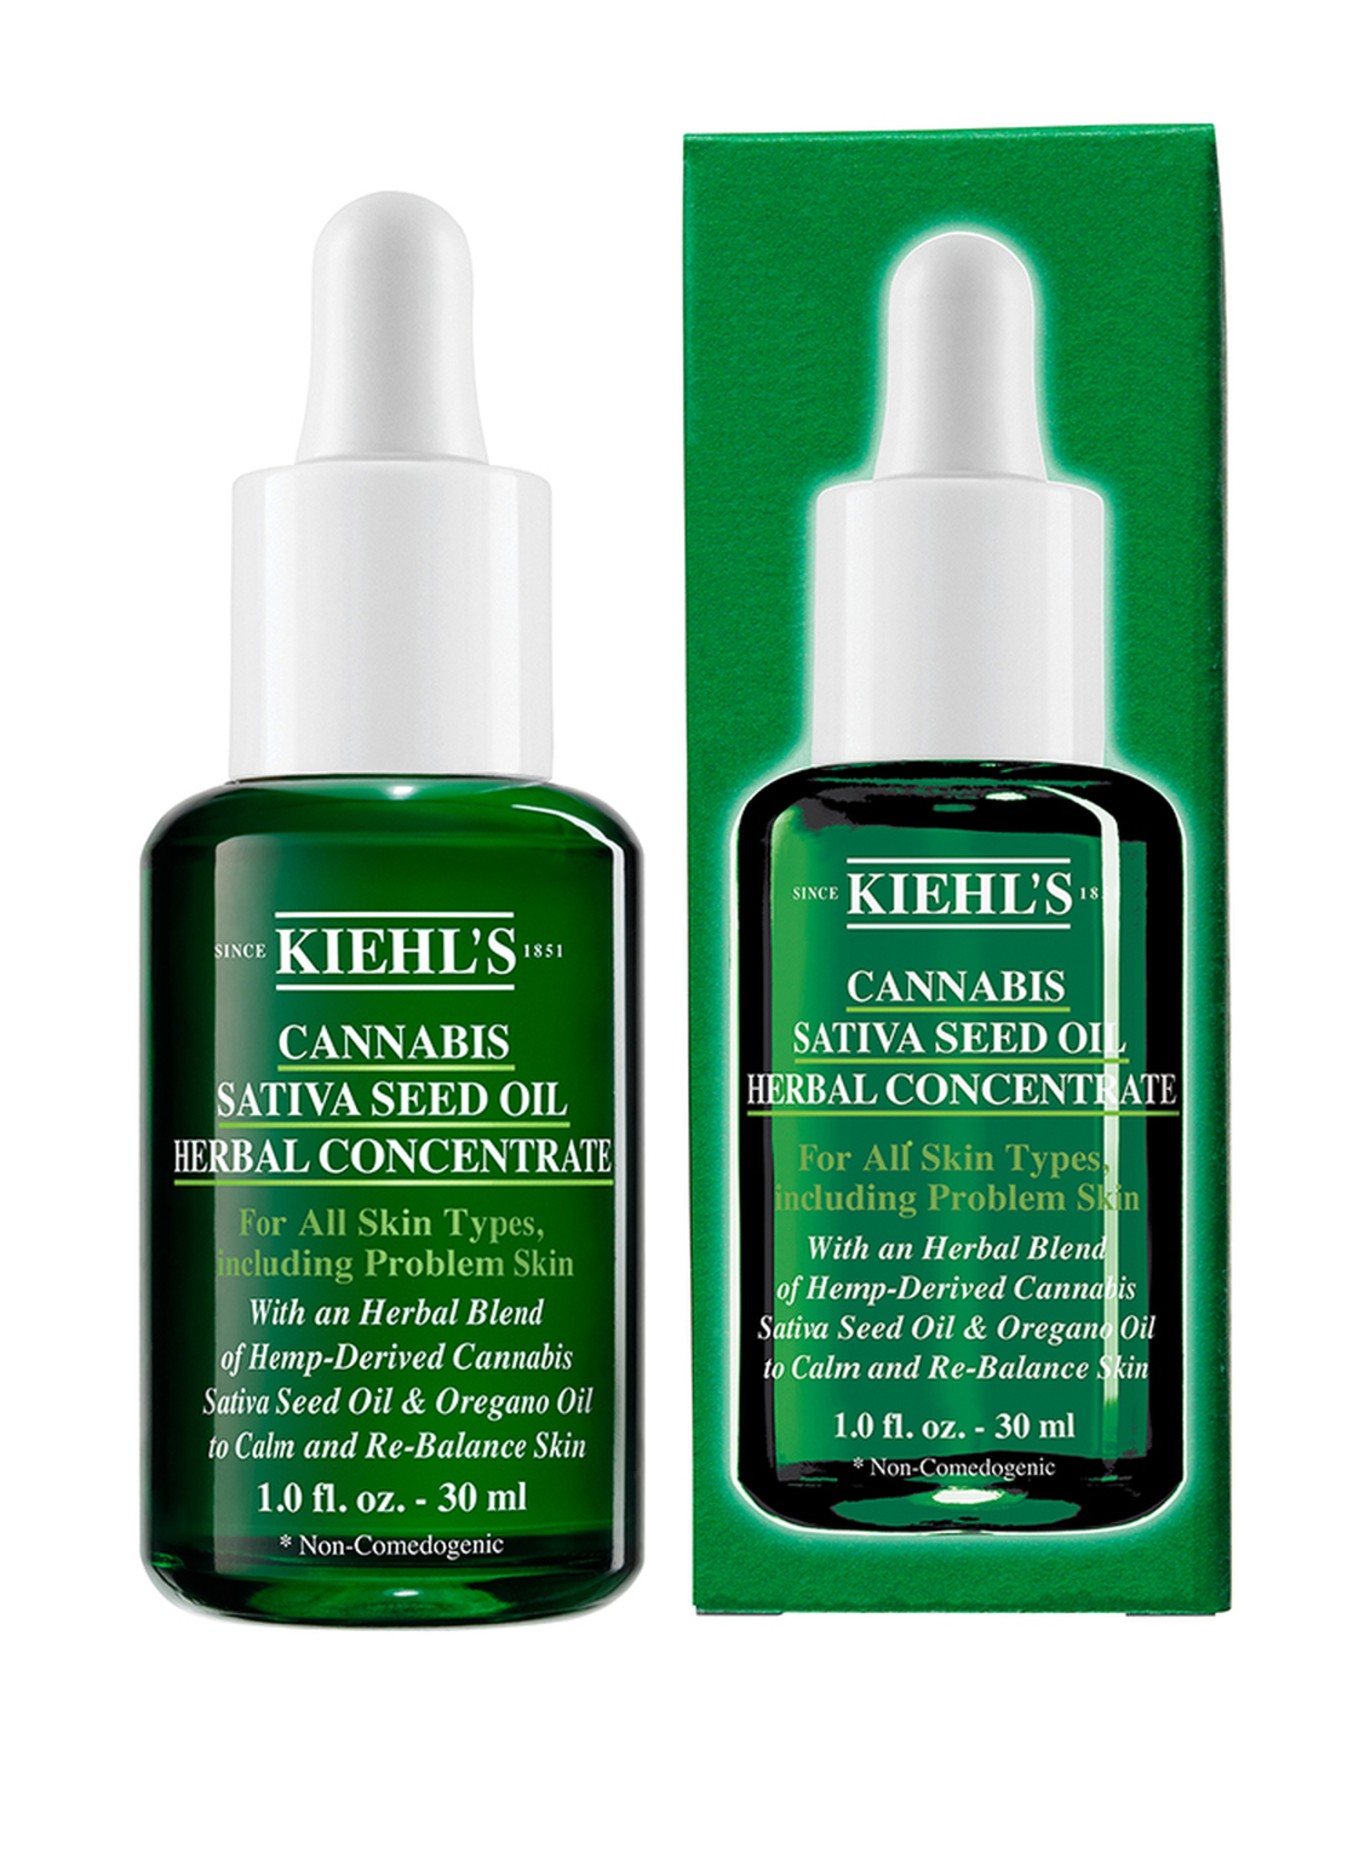 Kiehl's CANNABIS SATIVA SEED OIL HERBAL CONCENTRATE (Obrázek 2)